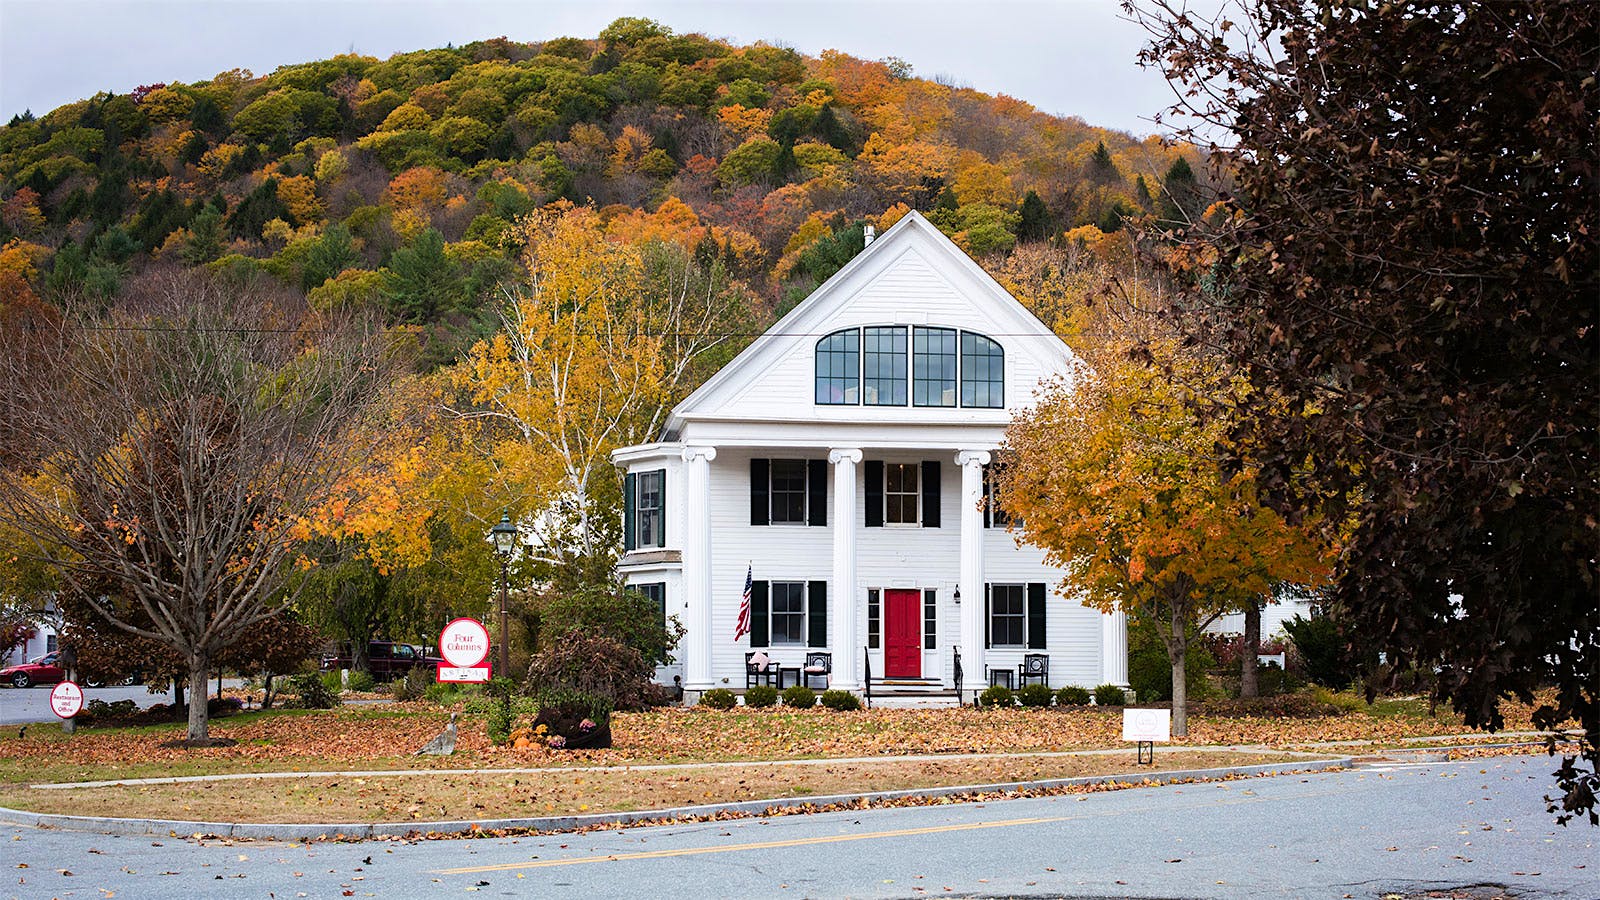 The exterior of Four Columns Inn, with fall-colored foliage in the background